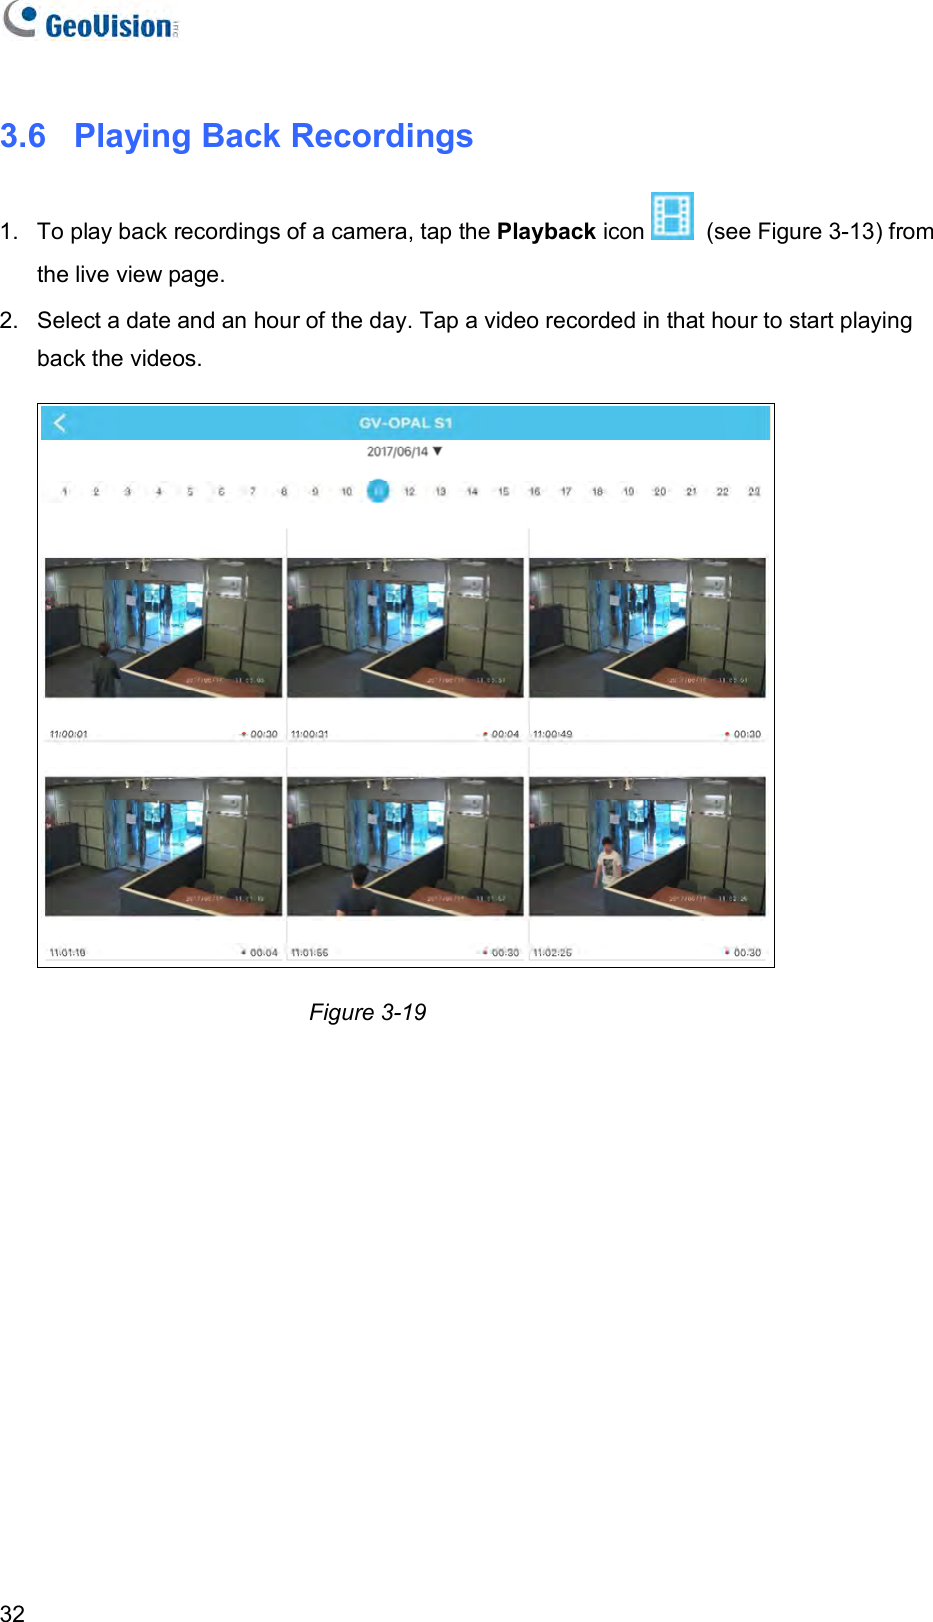   32 3.6   Playing Back Recordings 1.  To play back recordings of a camera, tap the Playback icon    (see Figure 3-13) from the live view page.  2.  Select a date and an hour of the day. Tap a video recorded in that hour to start playing back the videos.   Figure 3-19            